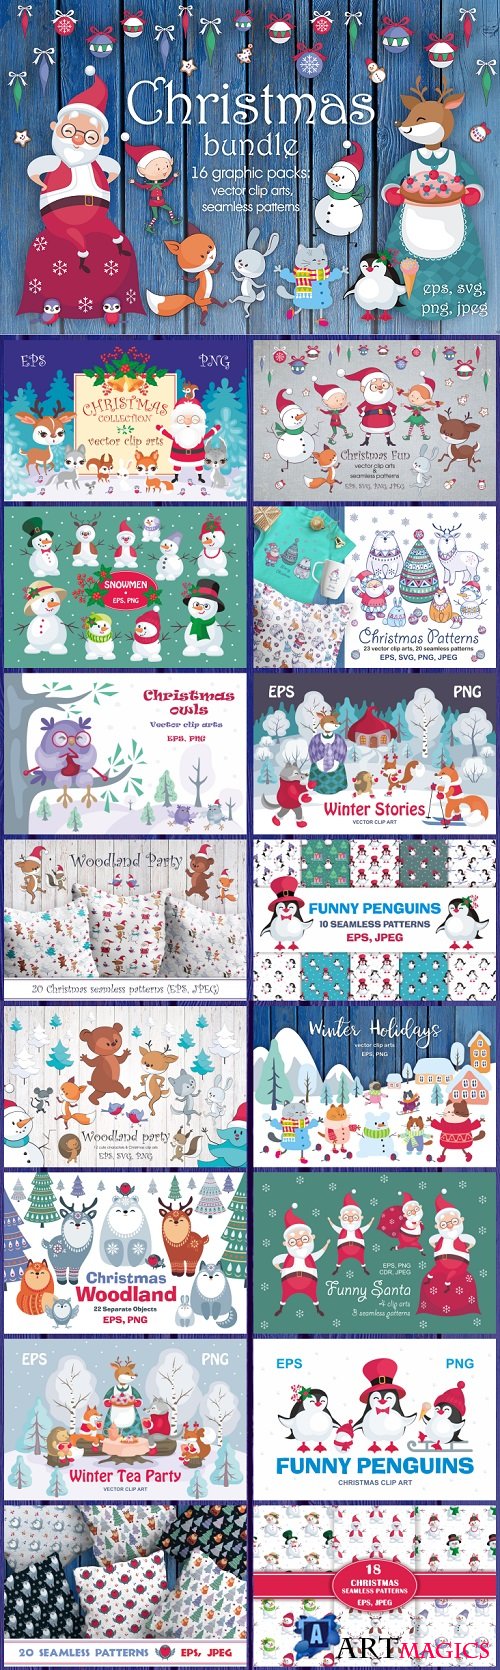 Christmas bundle. Vector cliparts and seamless patterns - 282971